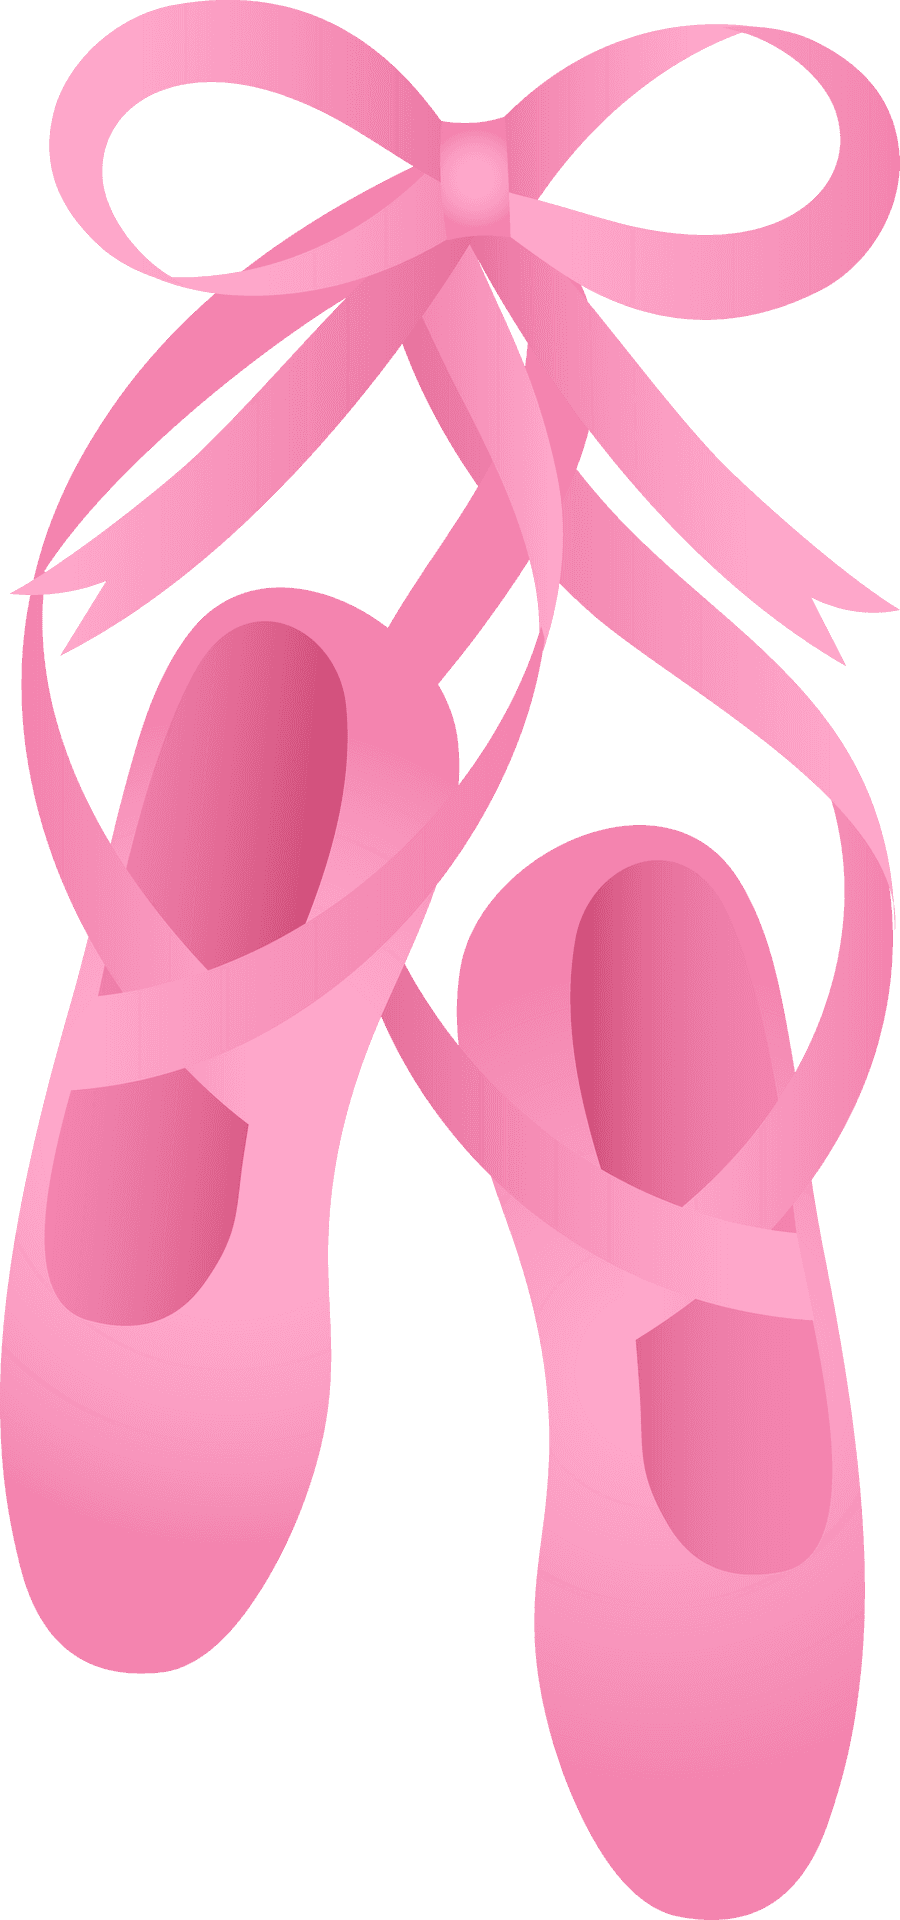 Pink Ballet Shoes With Ribbons PNG